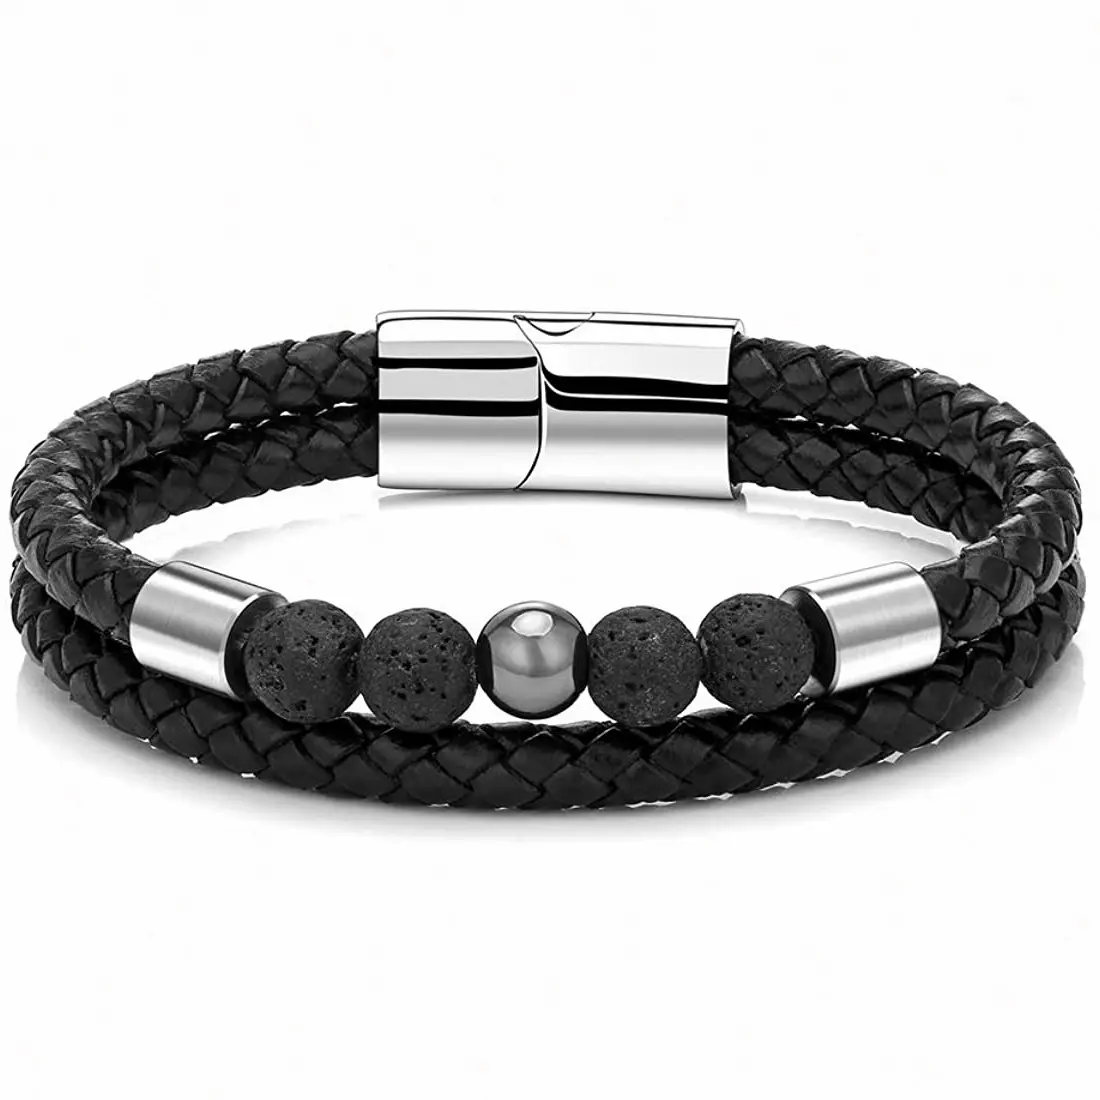 Punk Style Stainless Steel Genuine Leather Bracelet Handcrafted Natural Tiger Eye Lava Stone Bracelet